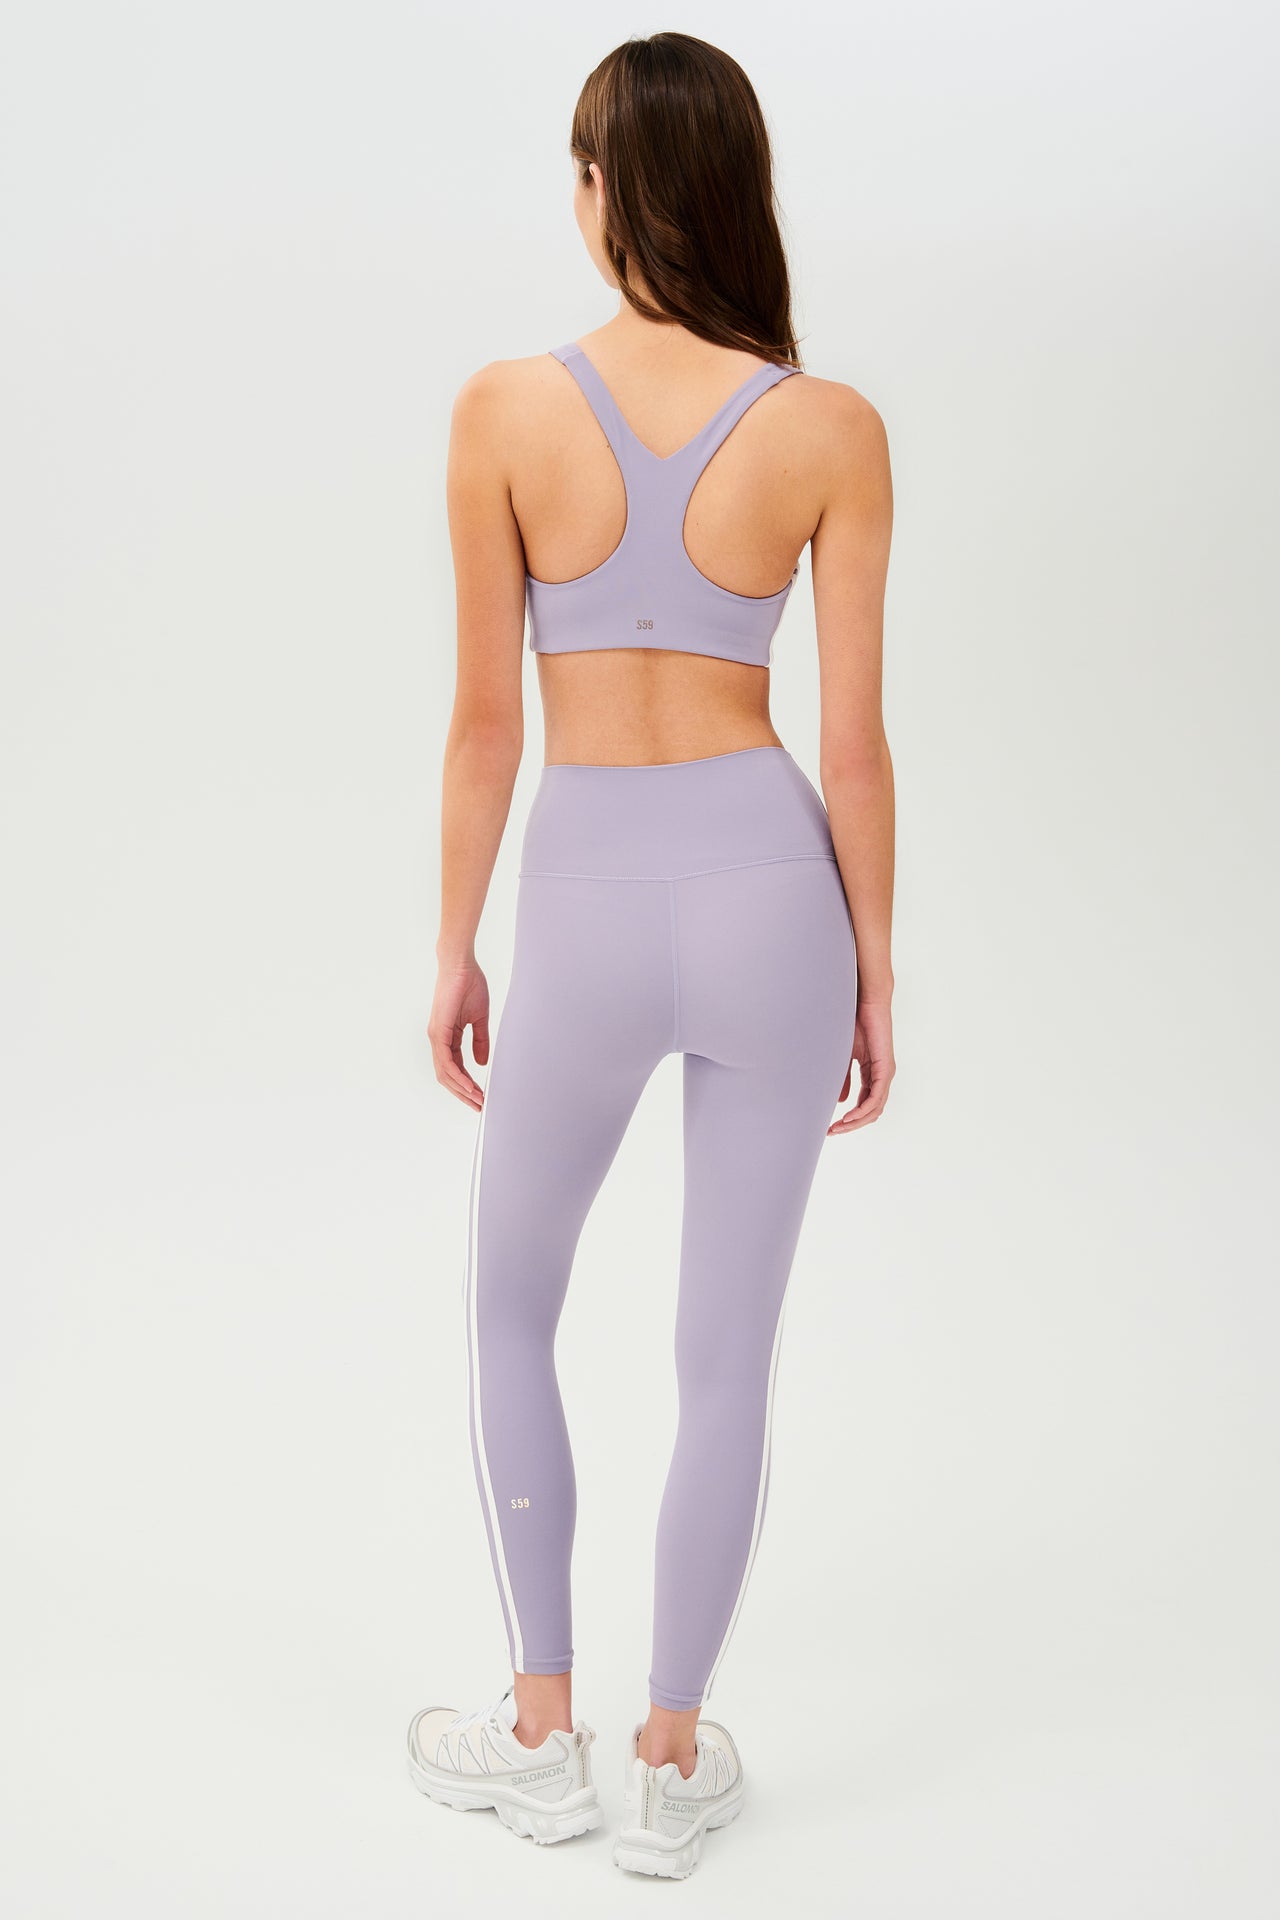 Full back view of girl wearing light purple leggings with two thin white stripes down the side and a light purple sports bra with white shoes